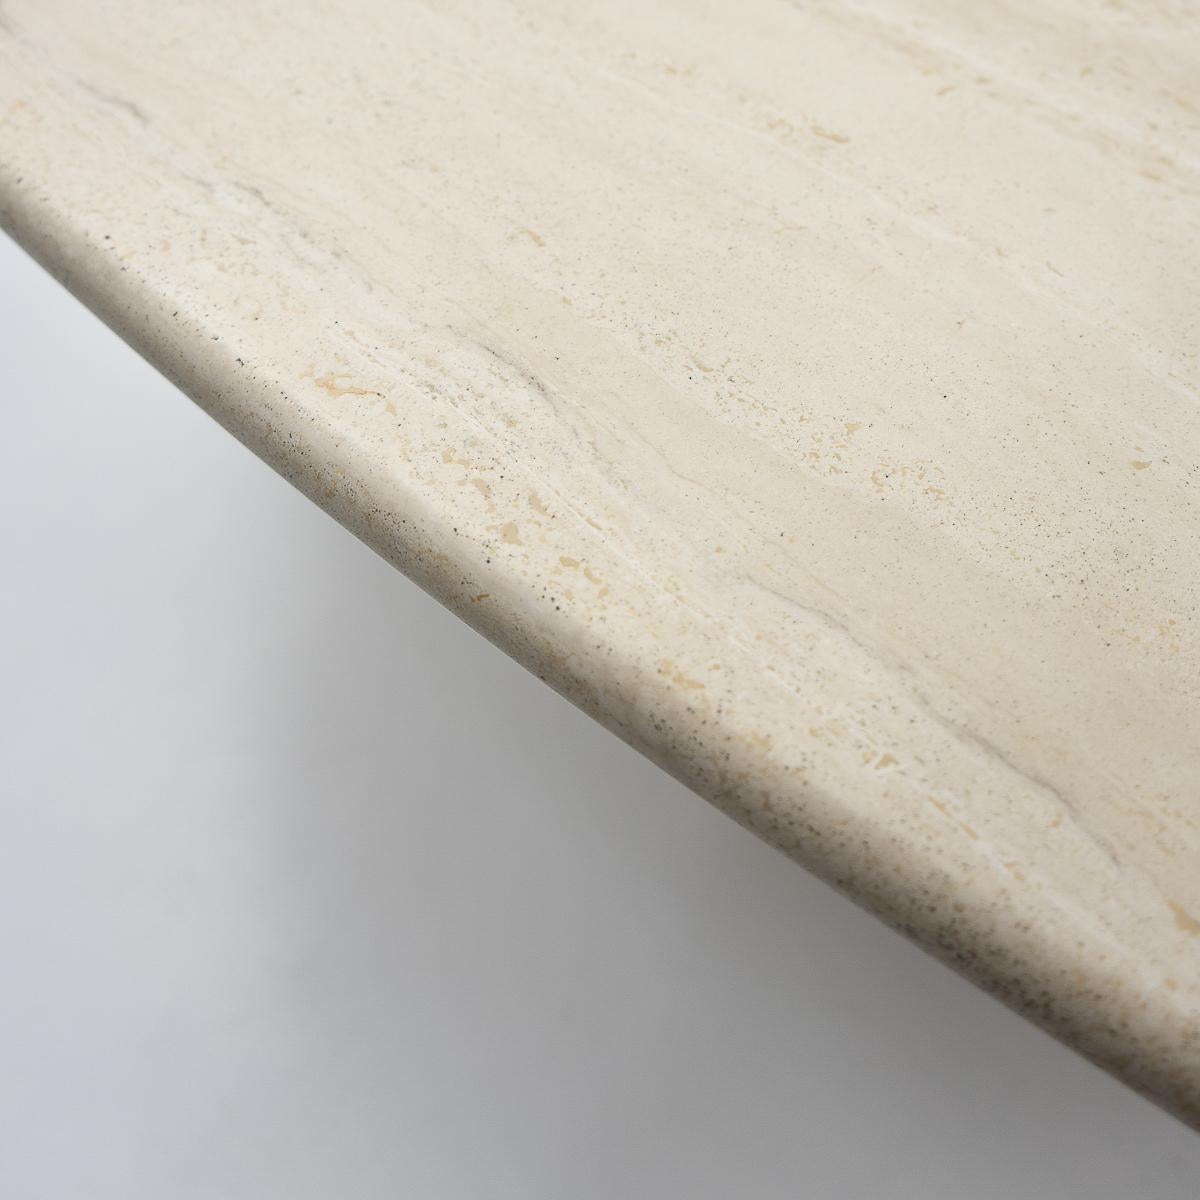 Sculptural Carlo Scarpa Travertine Dining Table, by Cattelan Italia, 1970s For Sale 3